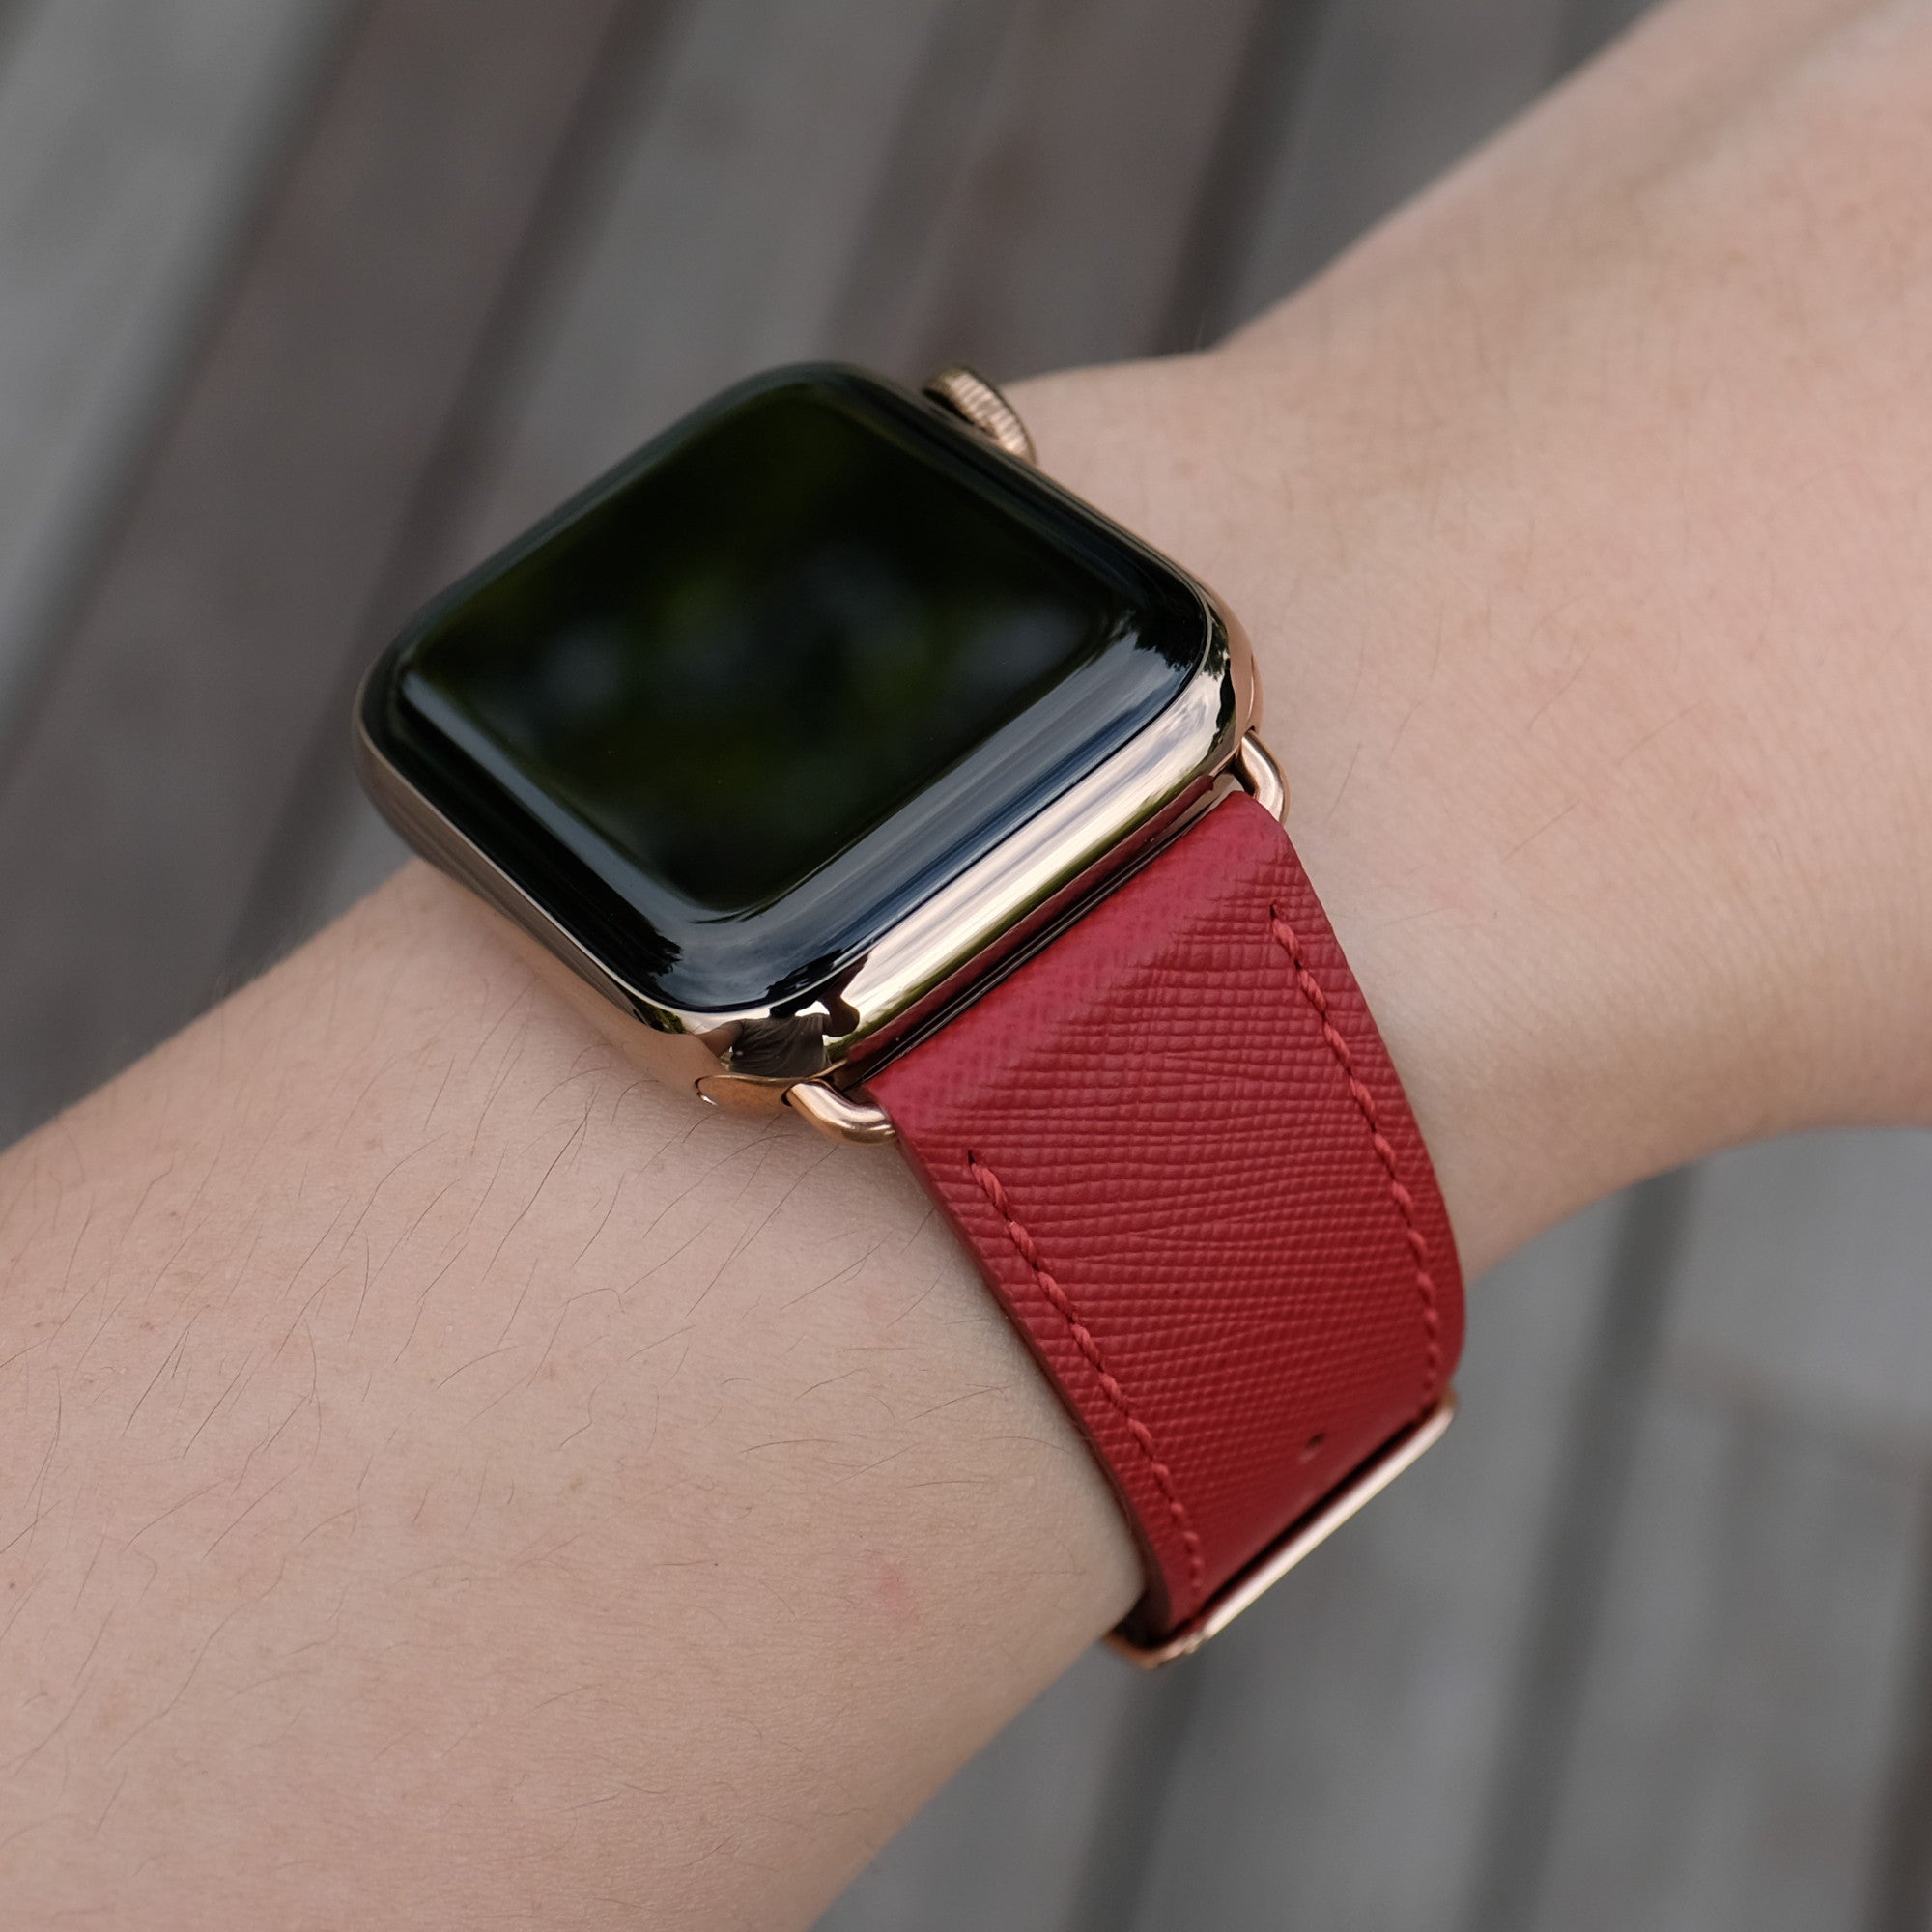 Pin and Buckle Apple Watch Bands - Saffiano - Textured Leather Apple Watch Bands - Crimson Red - Gold